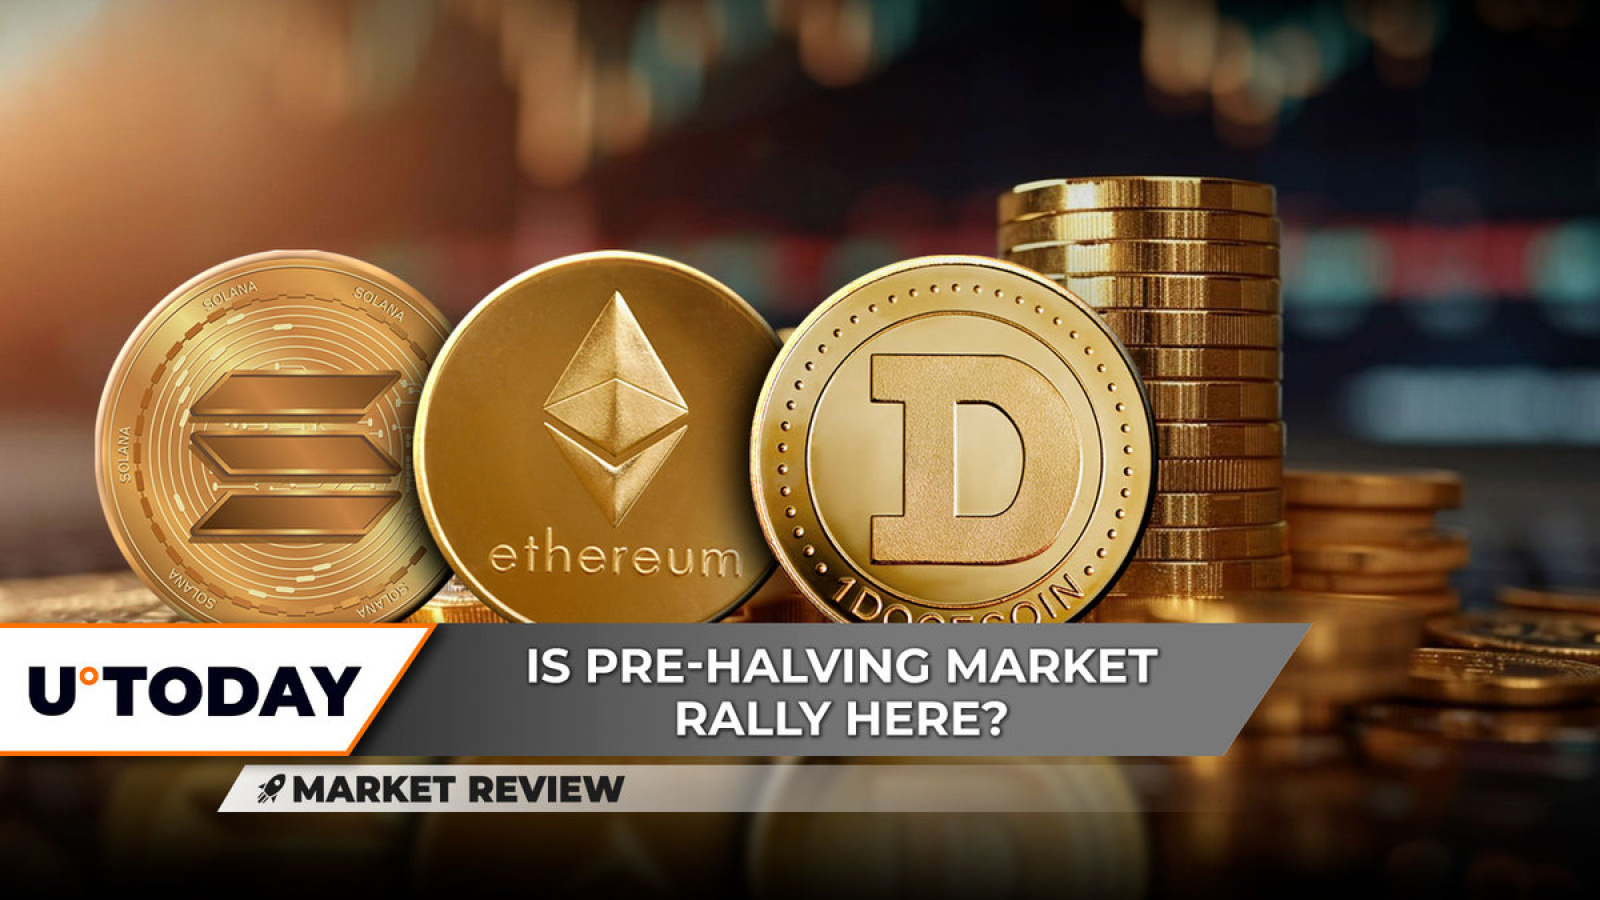 Dogecoin (DOGE) Back to Yearly High? Ethereum (ETH) on Verge of Breakthrough, Solana (SOL) Fell Behind Rest of Market: Reason